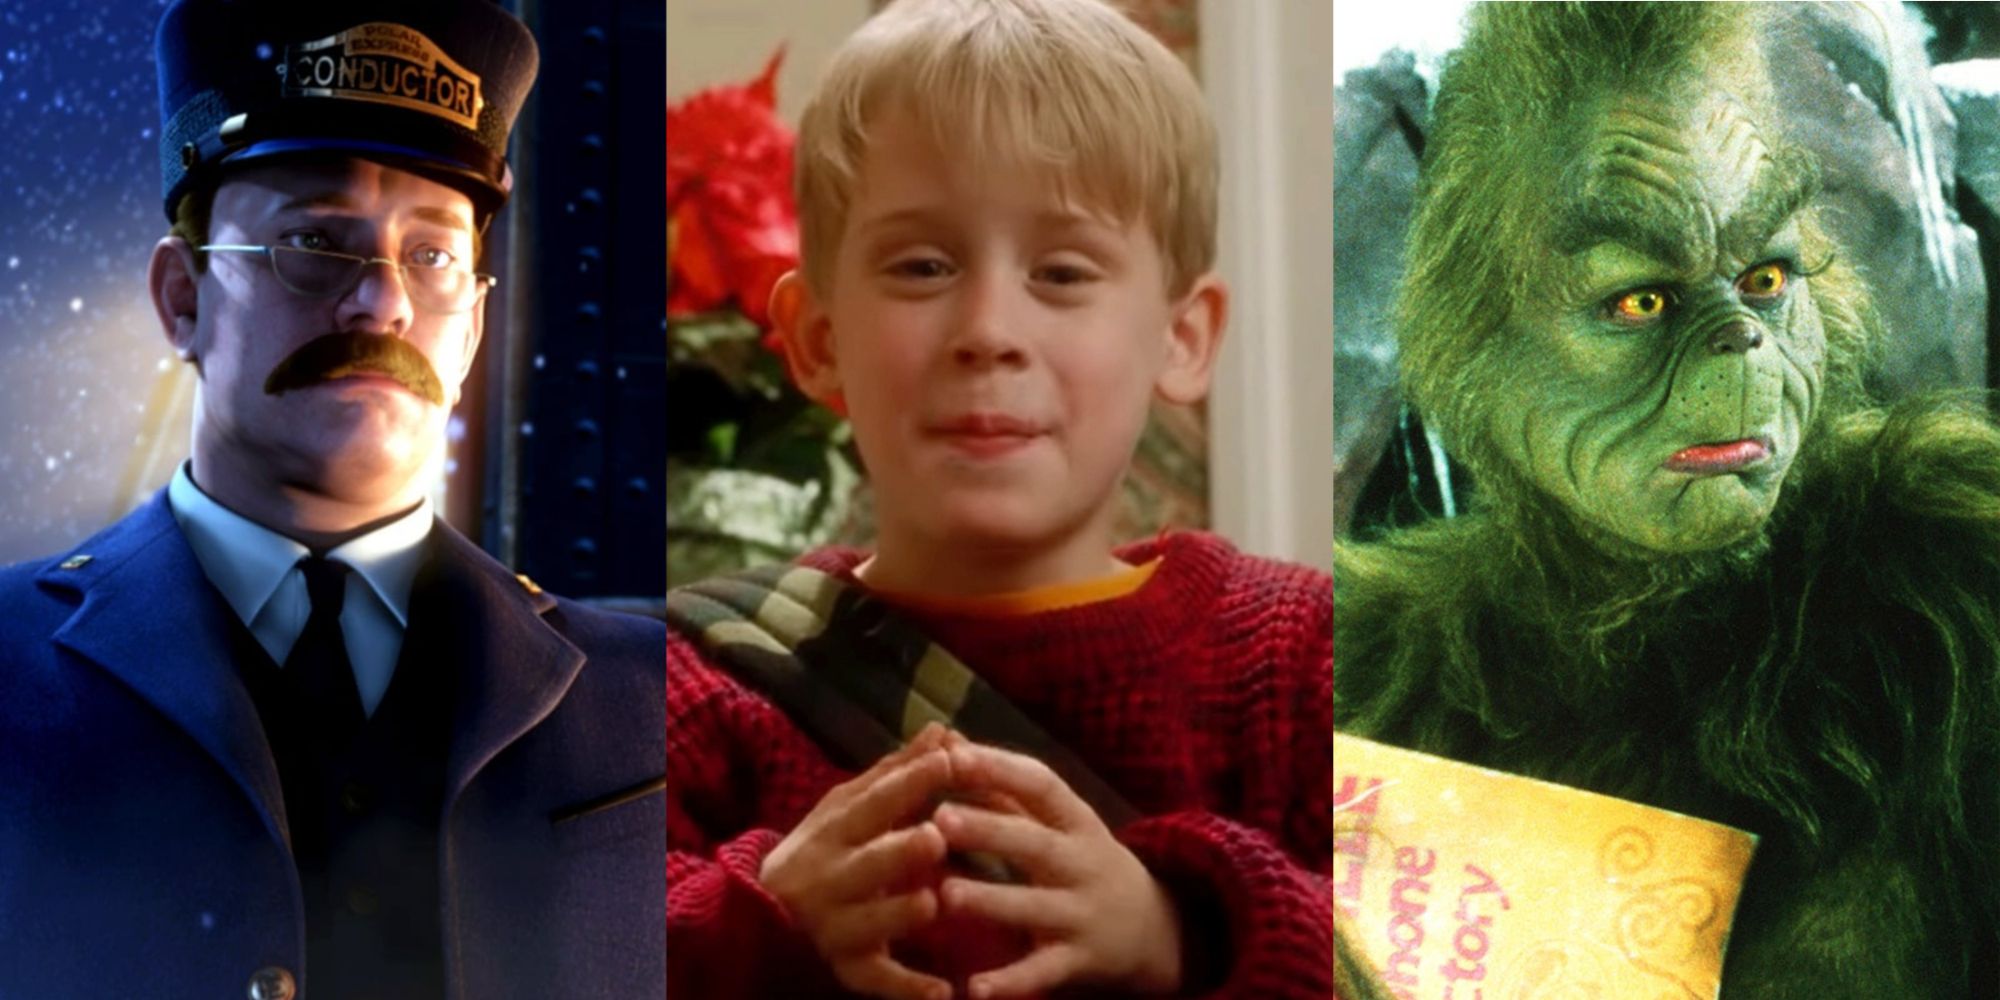 Split image of iconic Christmas characters from various movies